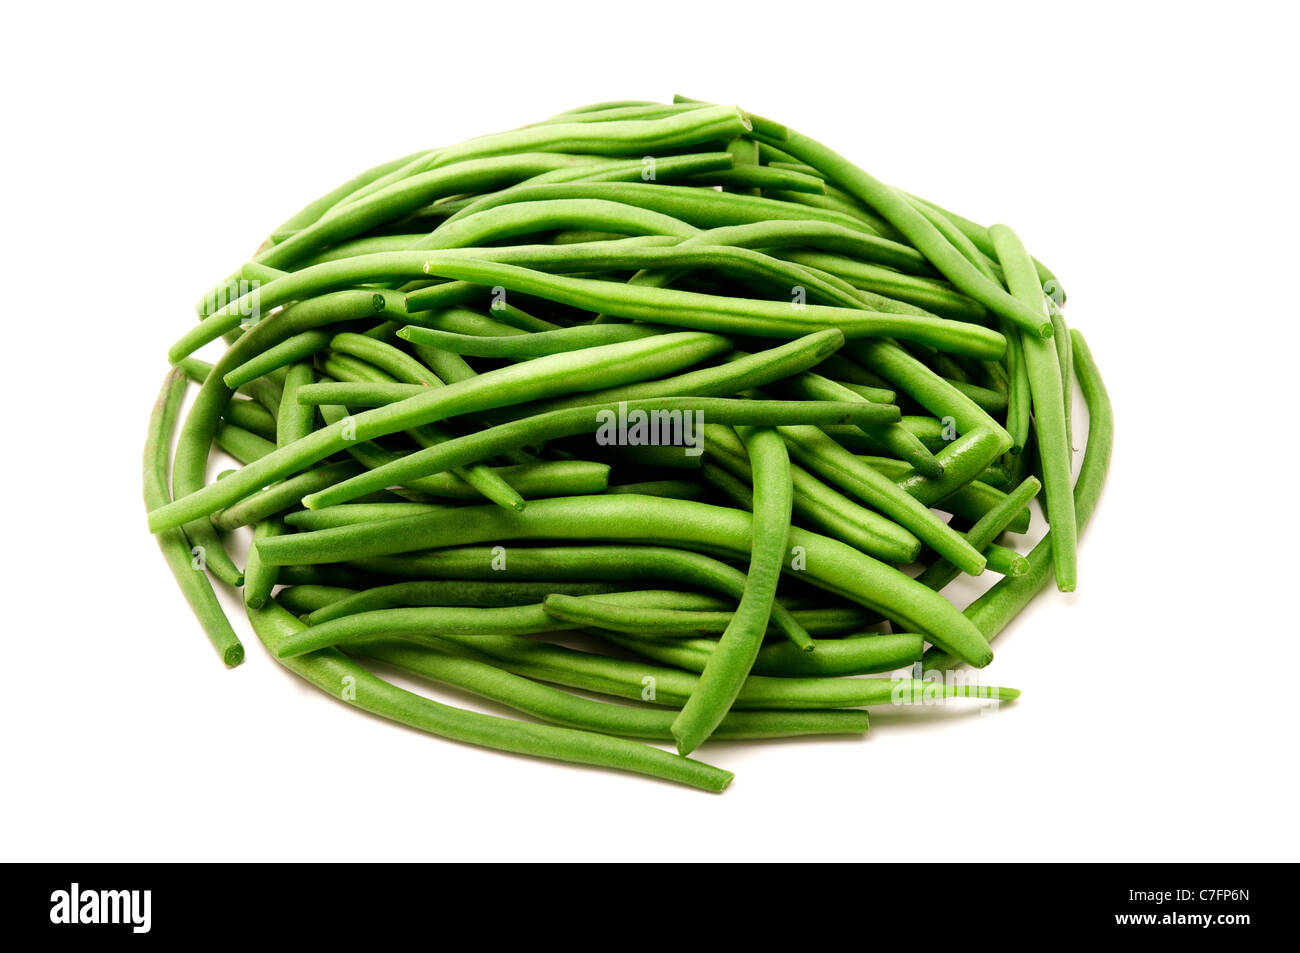 Whole green beans on a white background Stock Photo